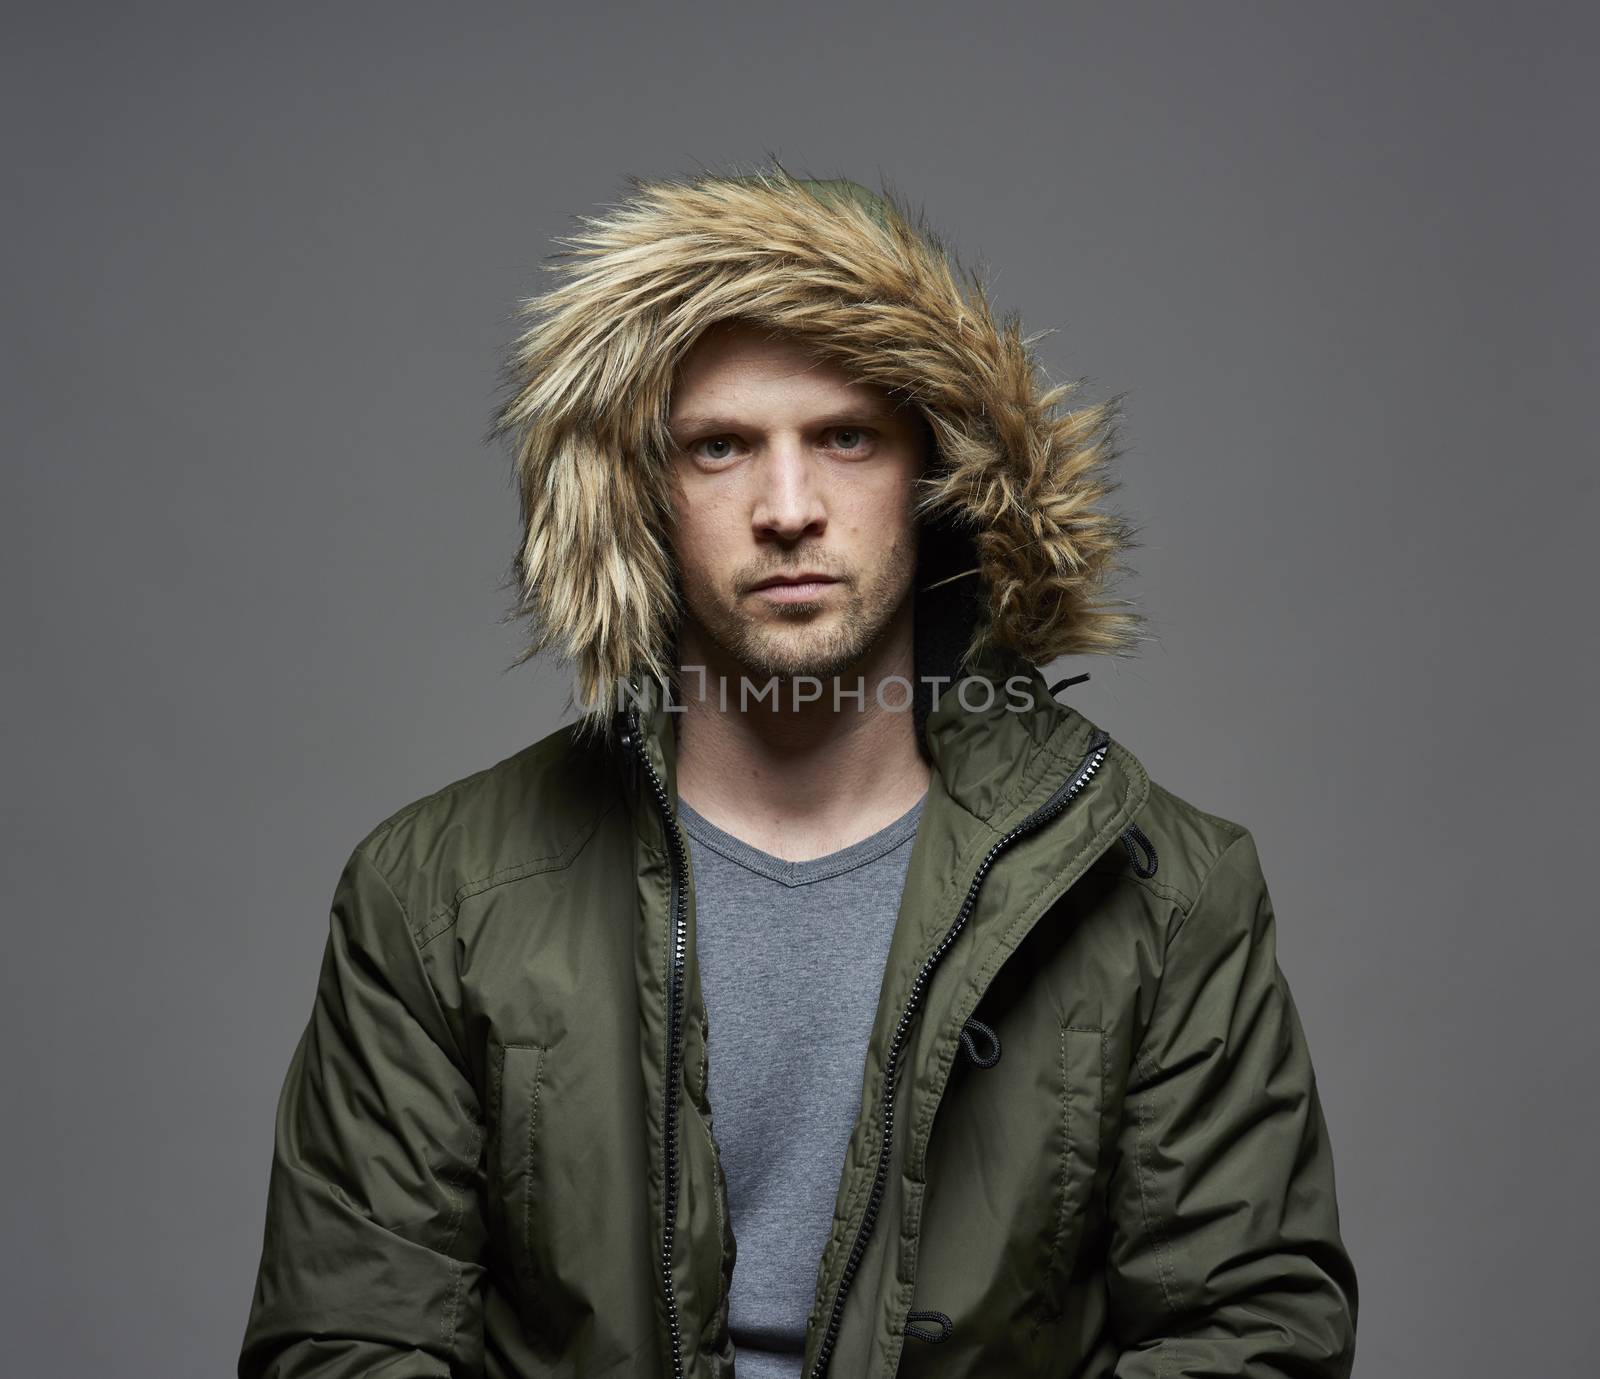 Studio portrait of young adult caucasian model wearing winter coat with hood on. Isolated on gray background.